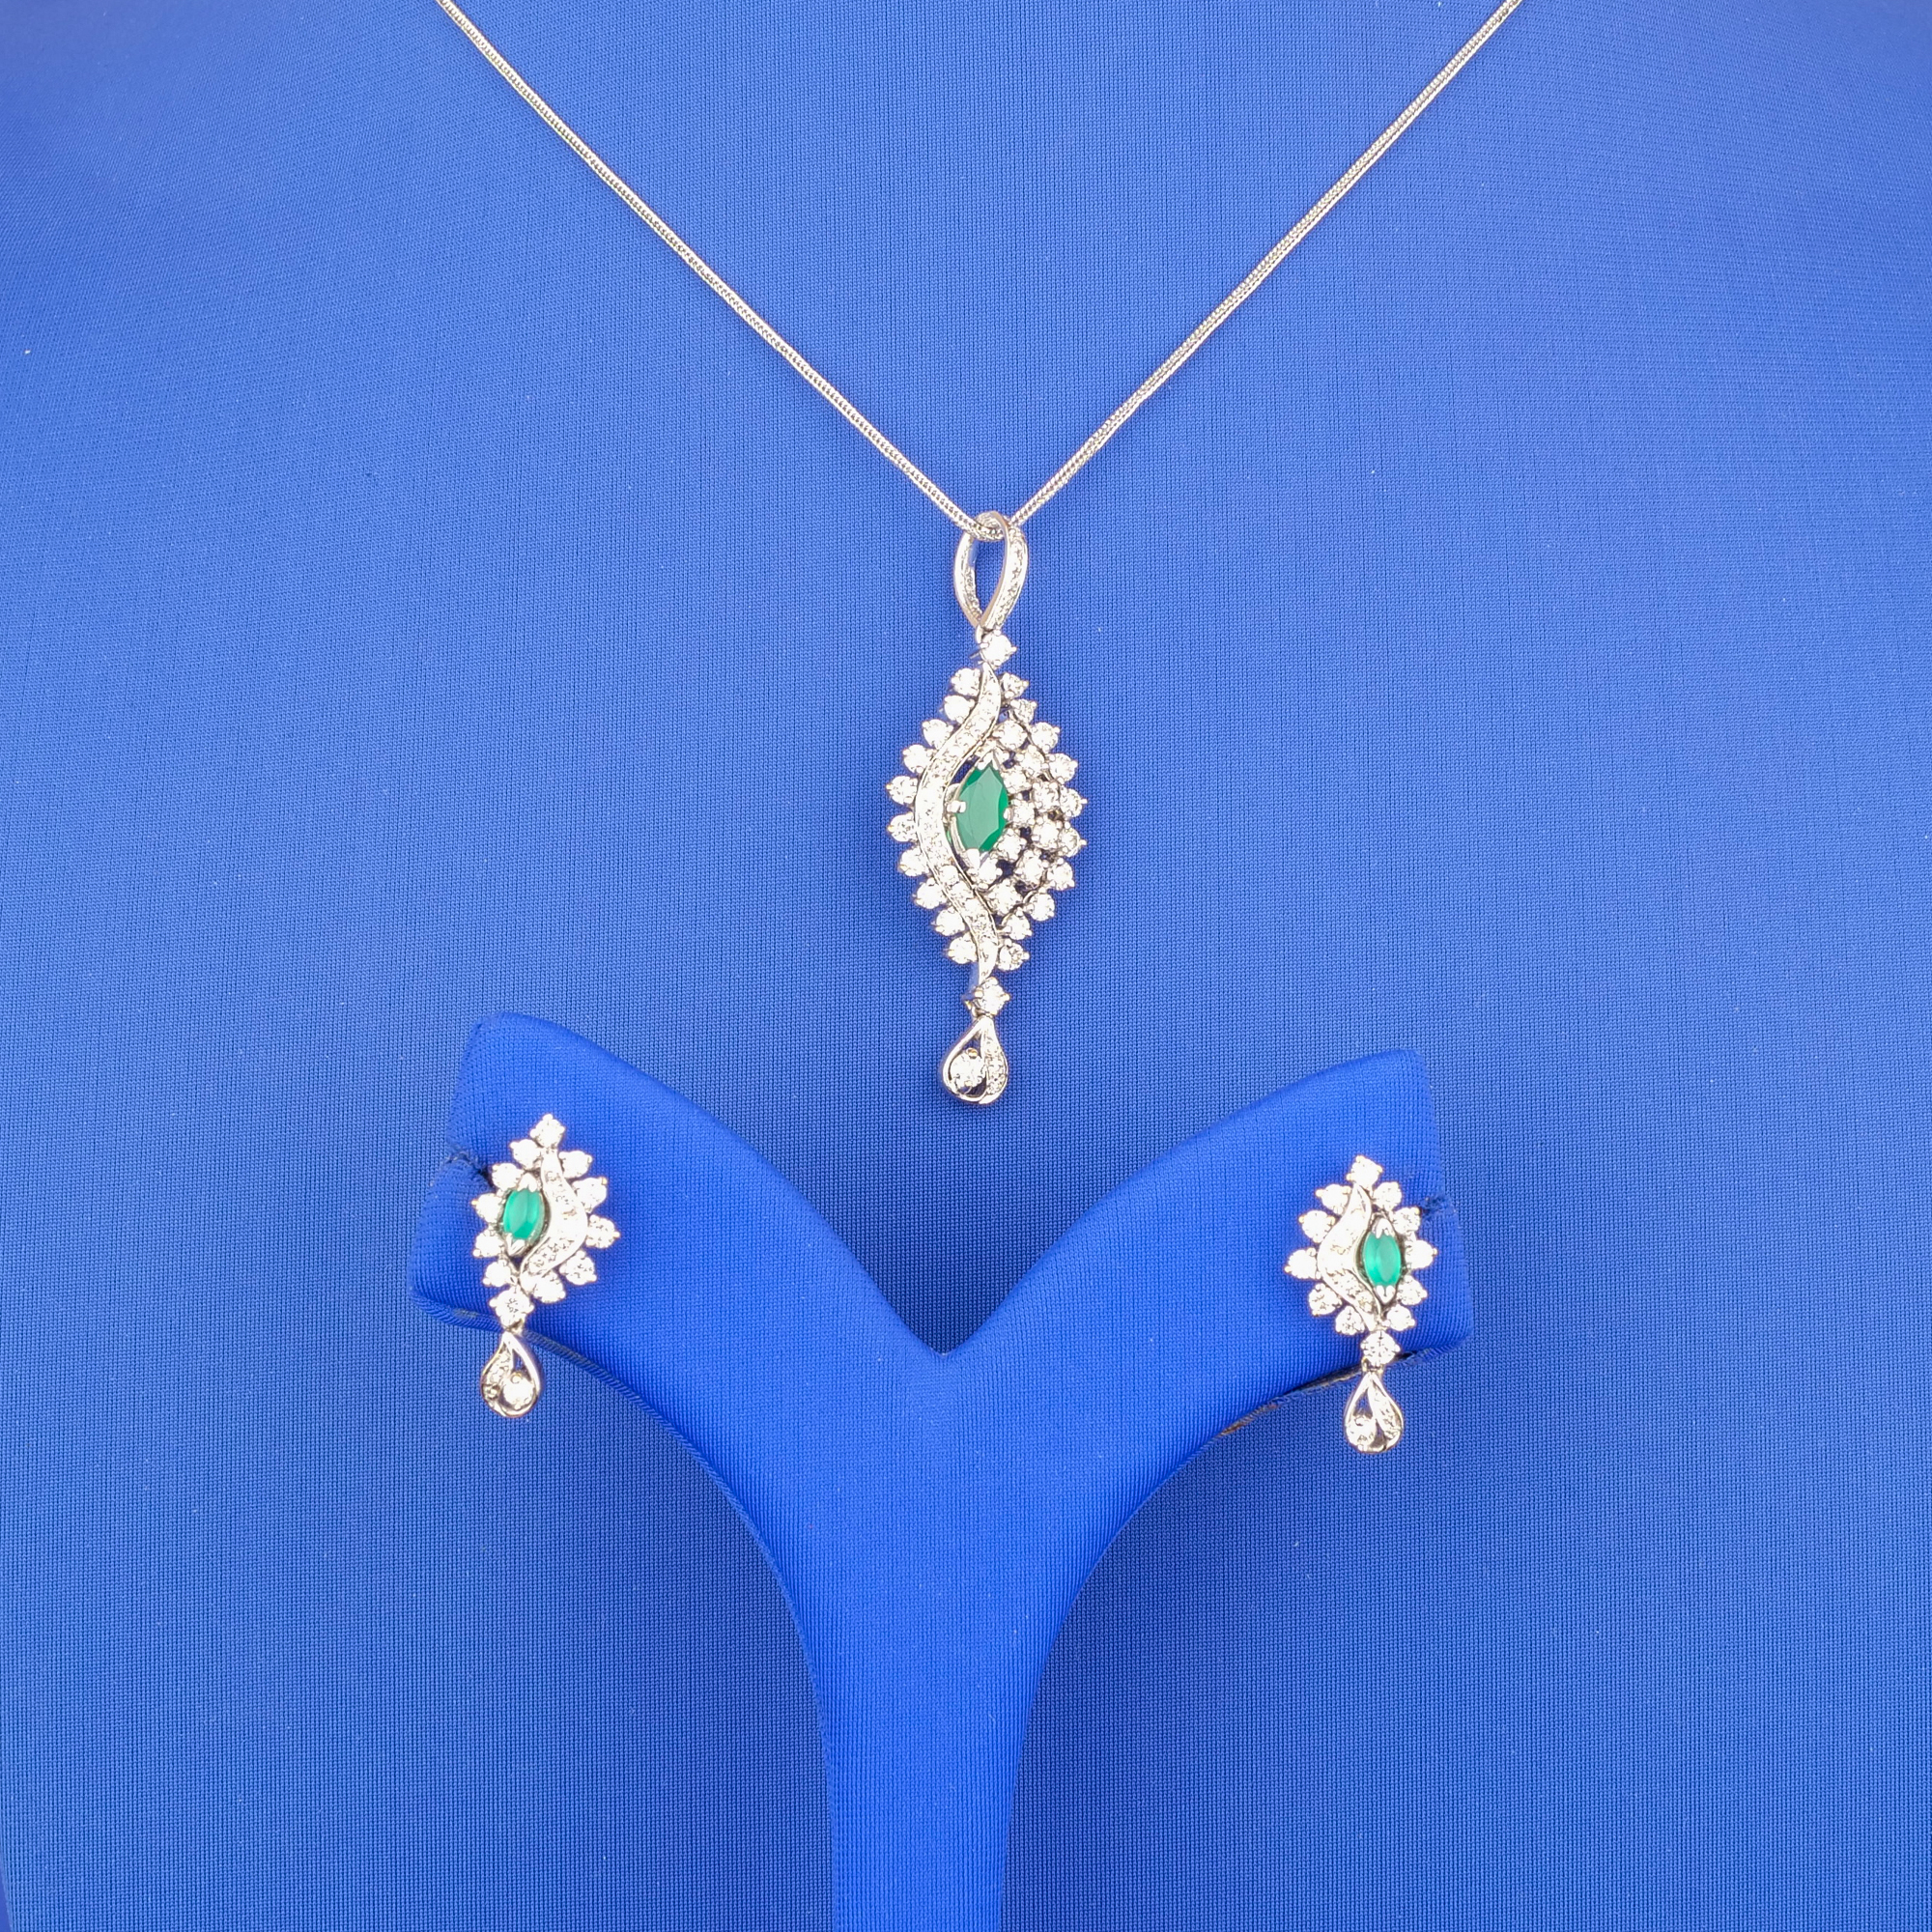 Frosty Allure: Handmade 18k White Gold Diamond Pendant and Earrings Set (Chain not included)